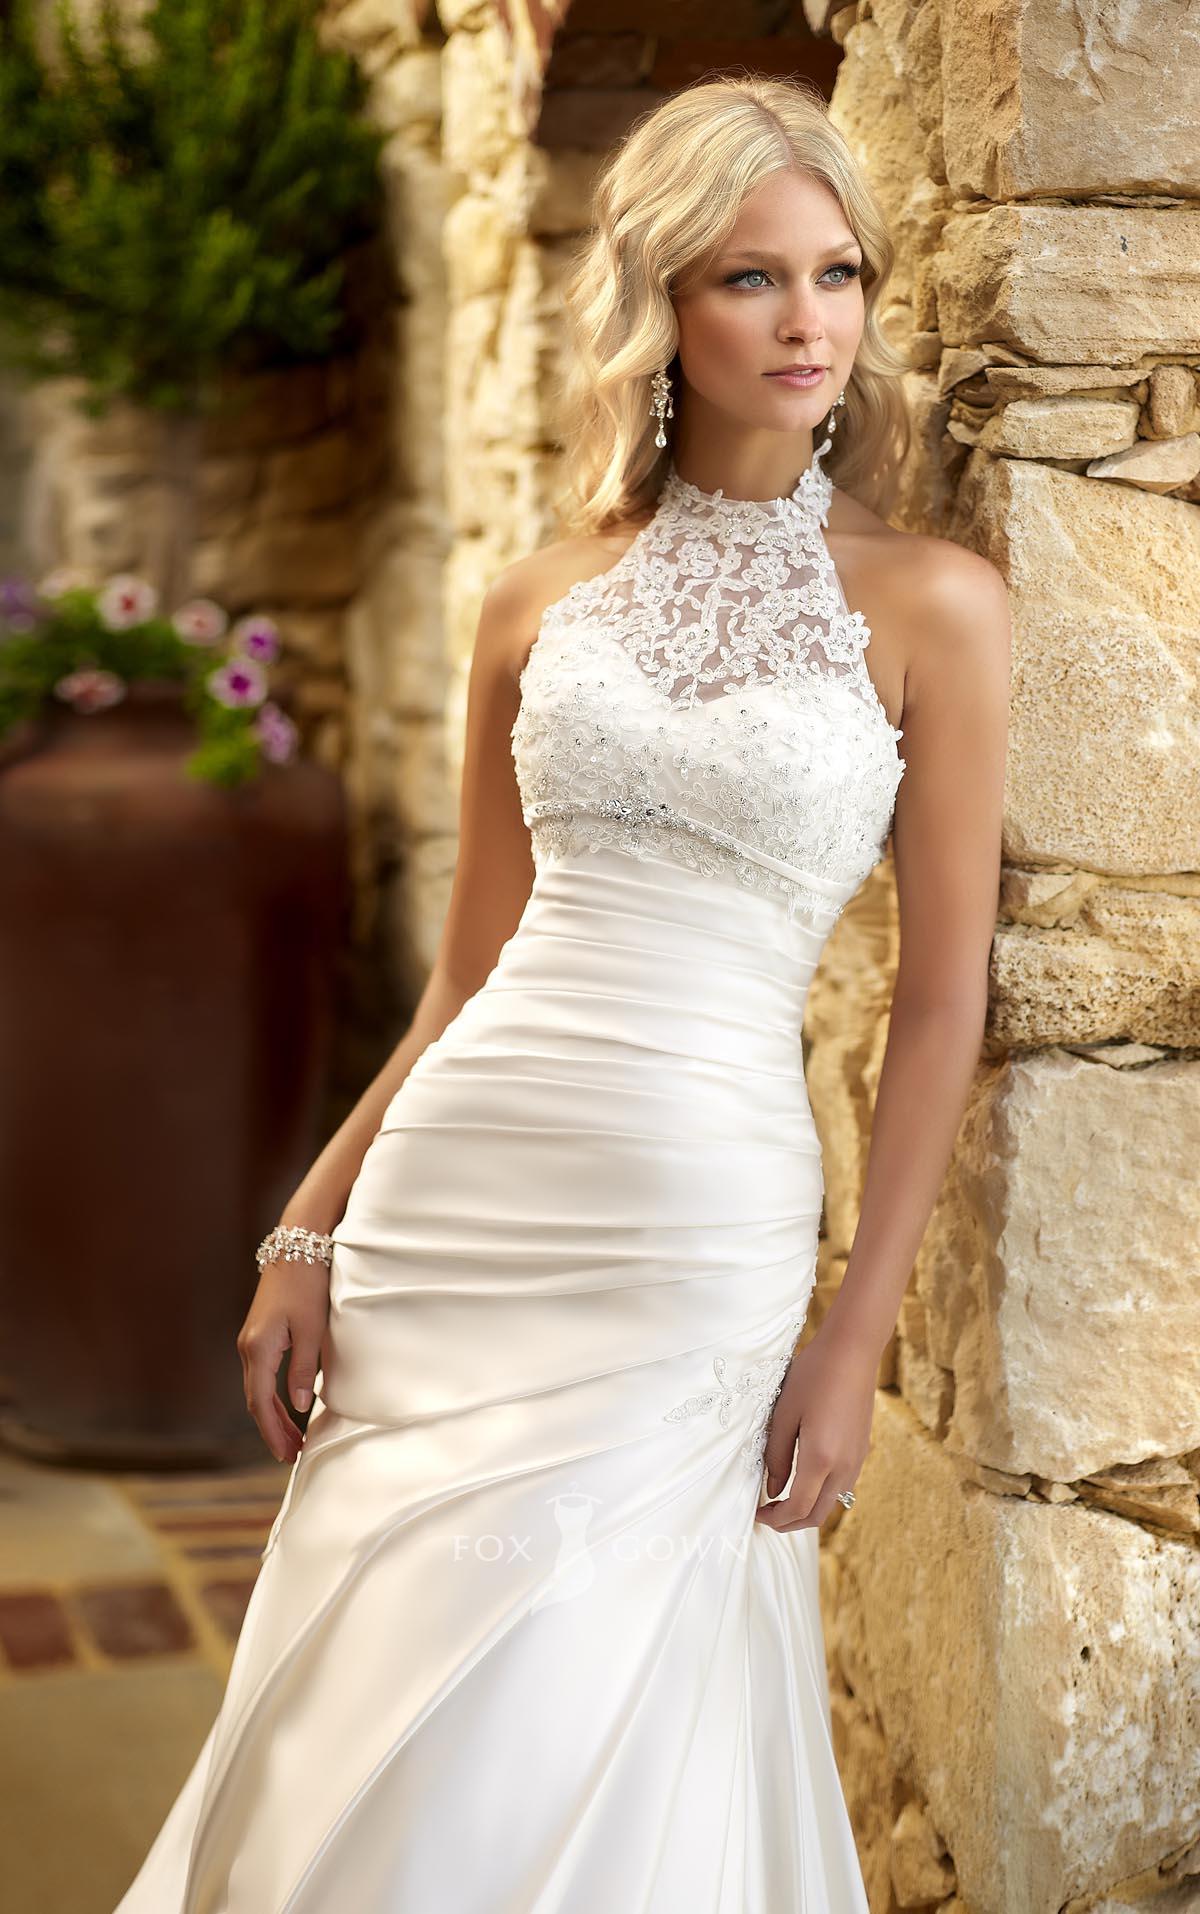 Amazing Halter Dresses For Wedding of the decade The ultimate guide 